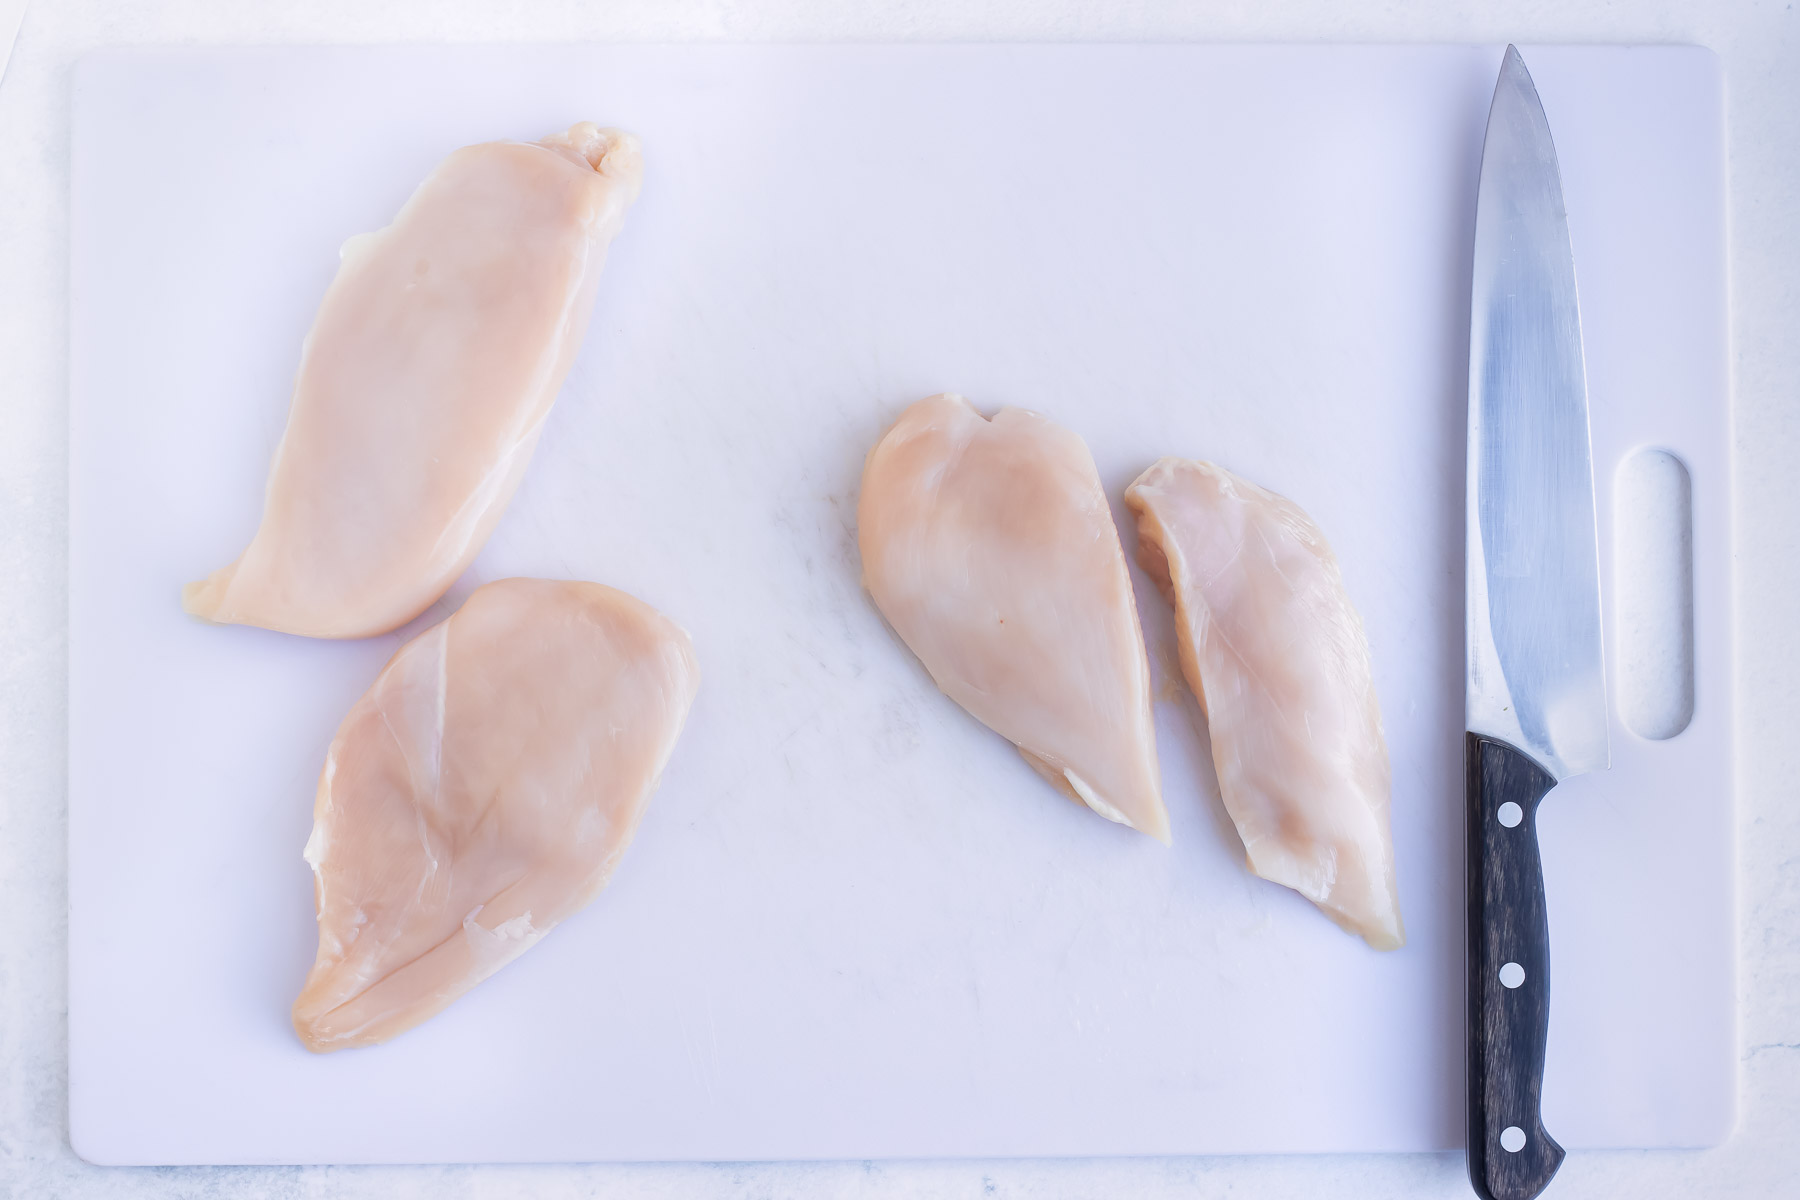 Equal sized chicken breast portions for juicy, tender, meat.